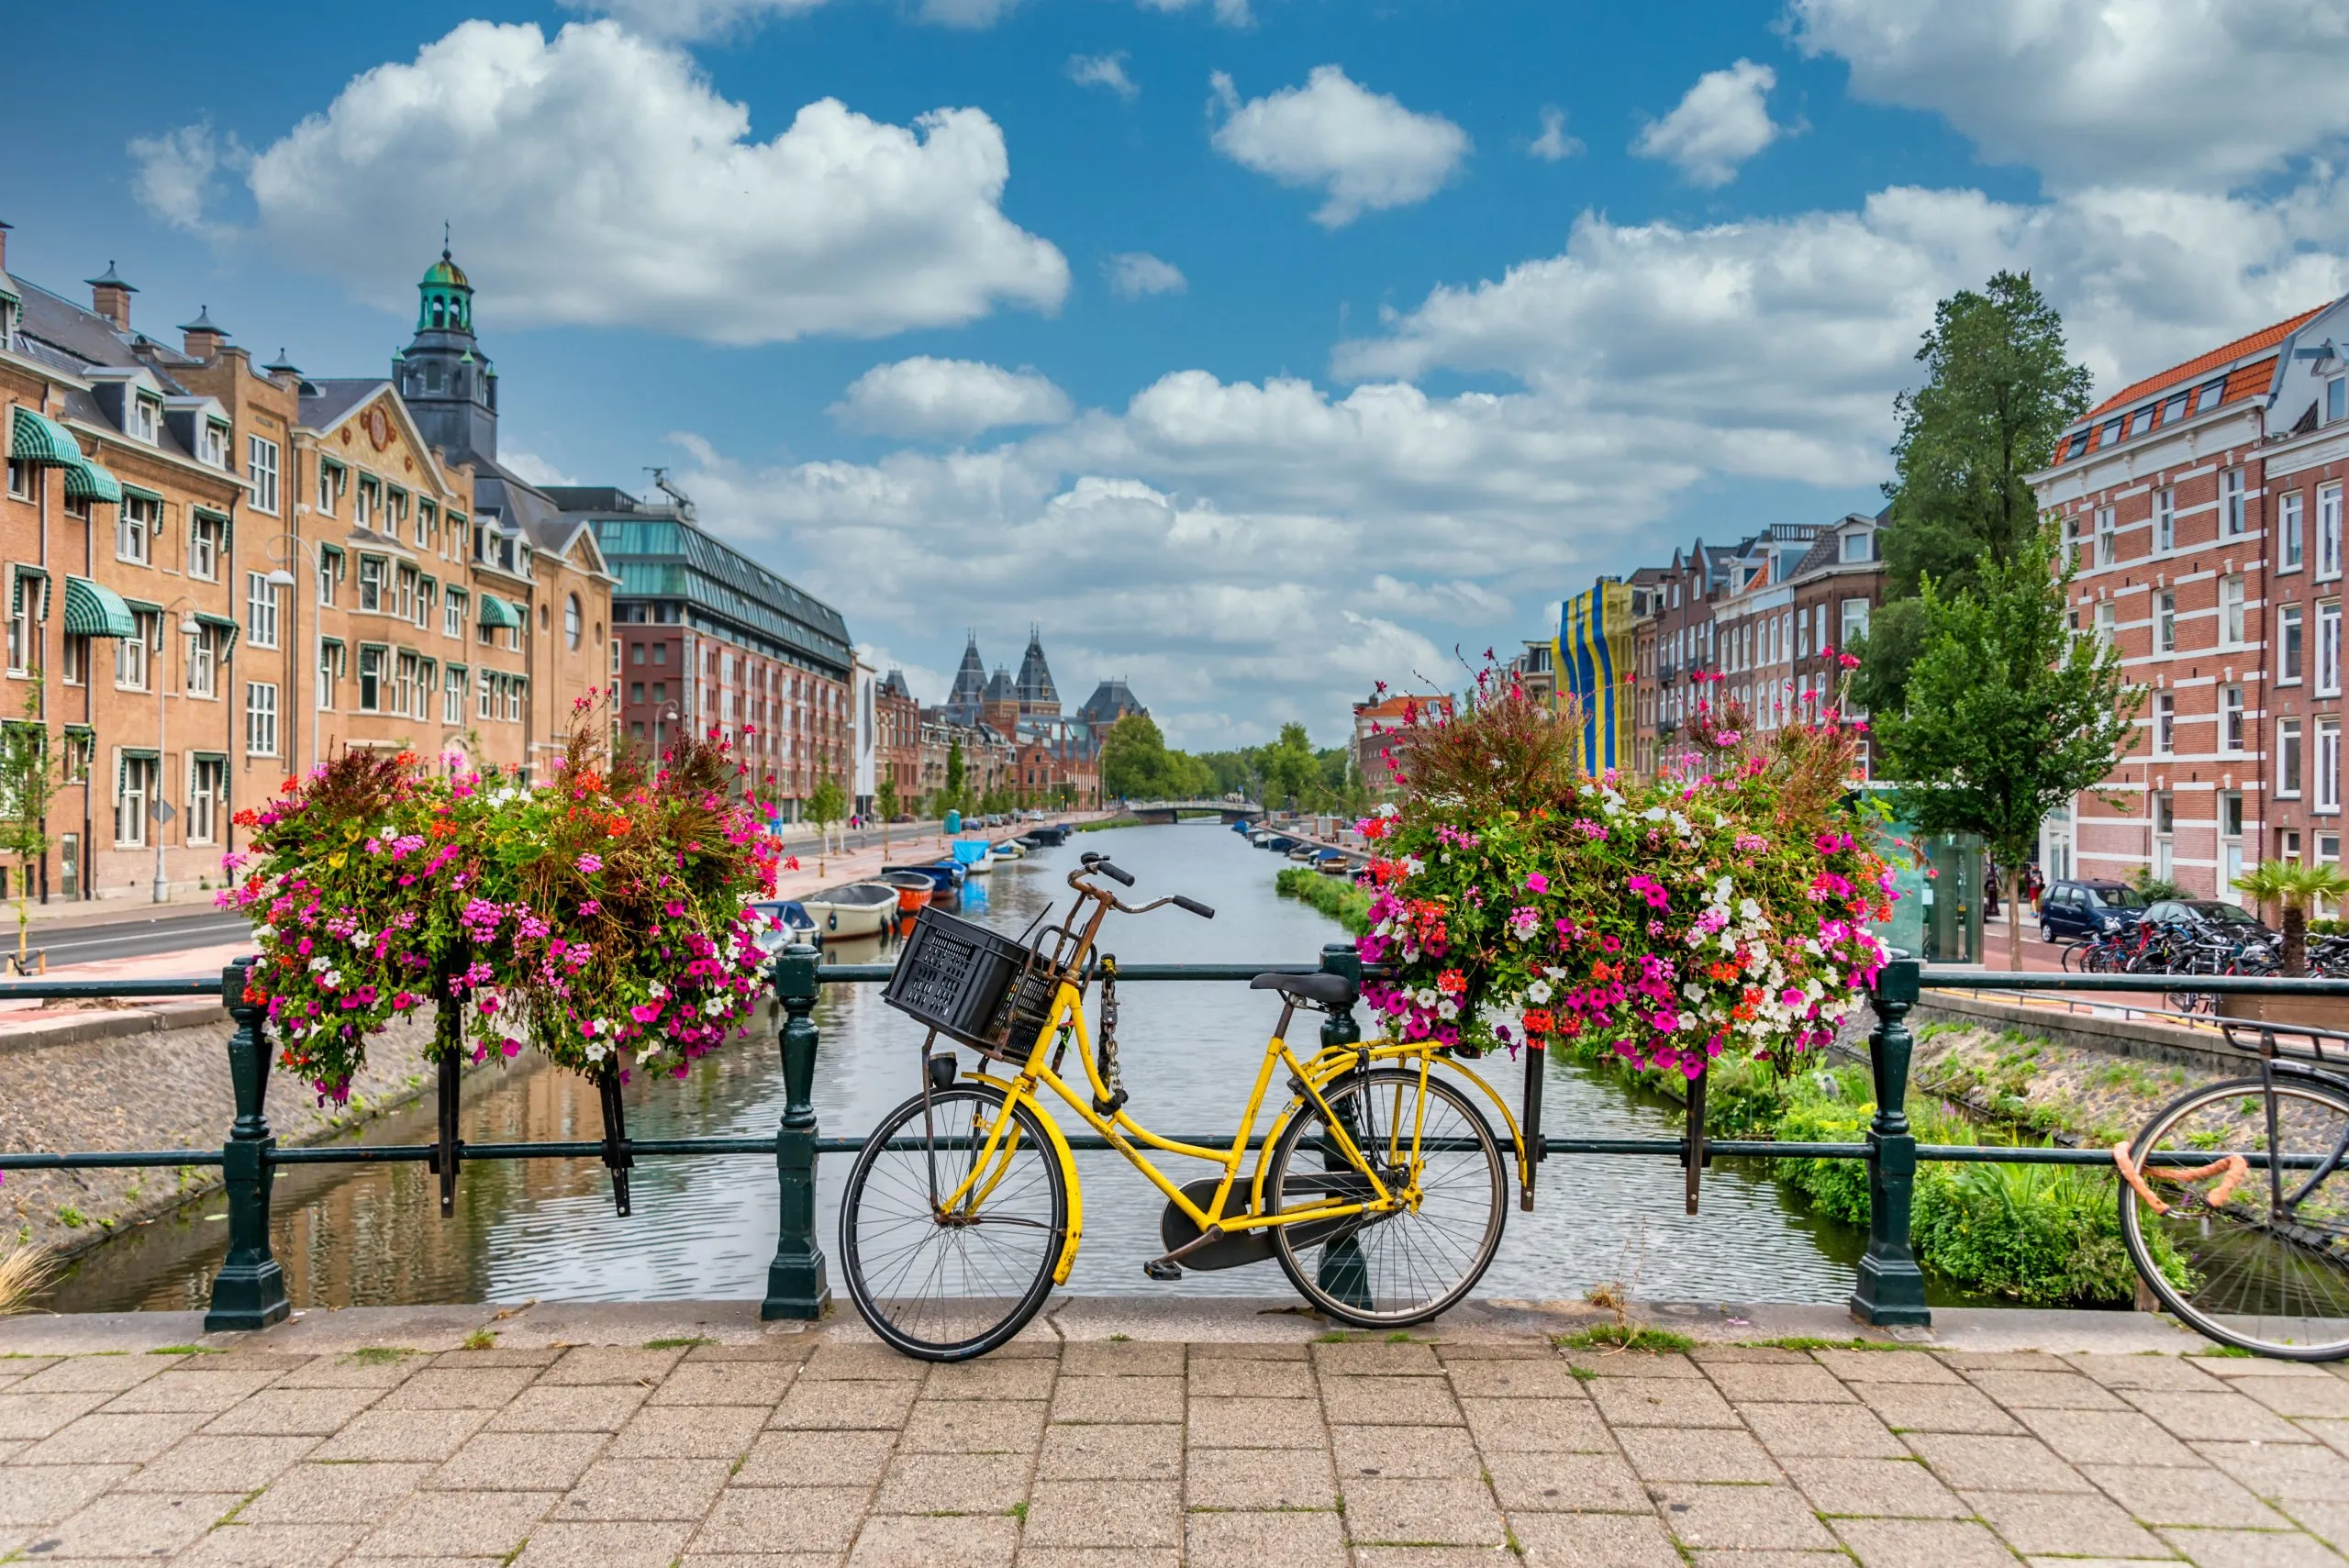 Bicycle on a Bridge over a Canal in Amsterdam Netherlands with Blue Sky